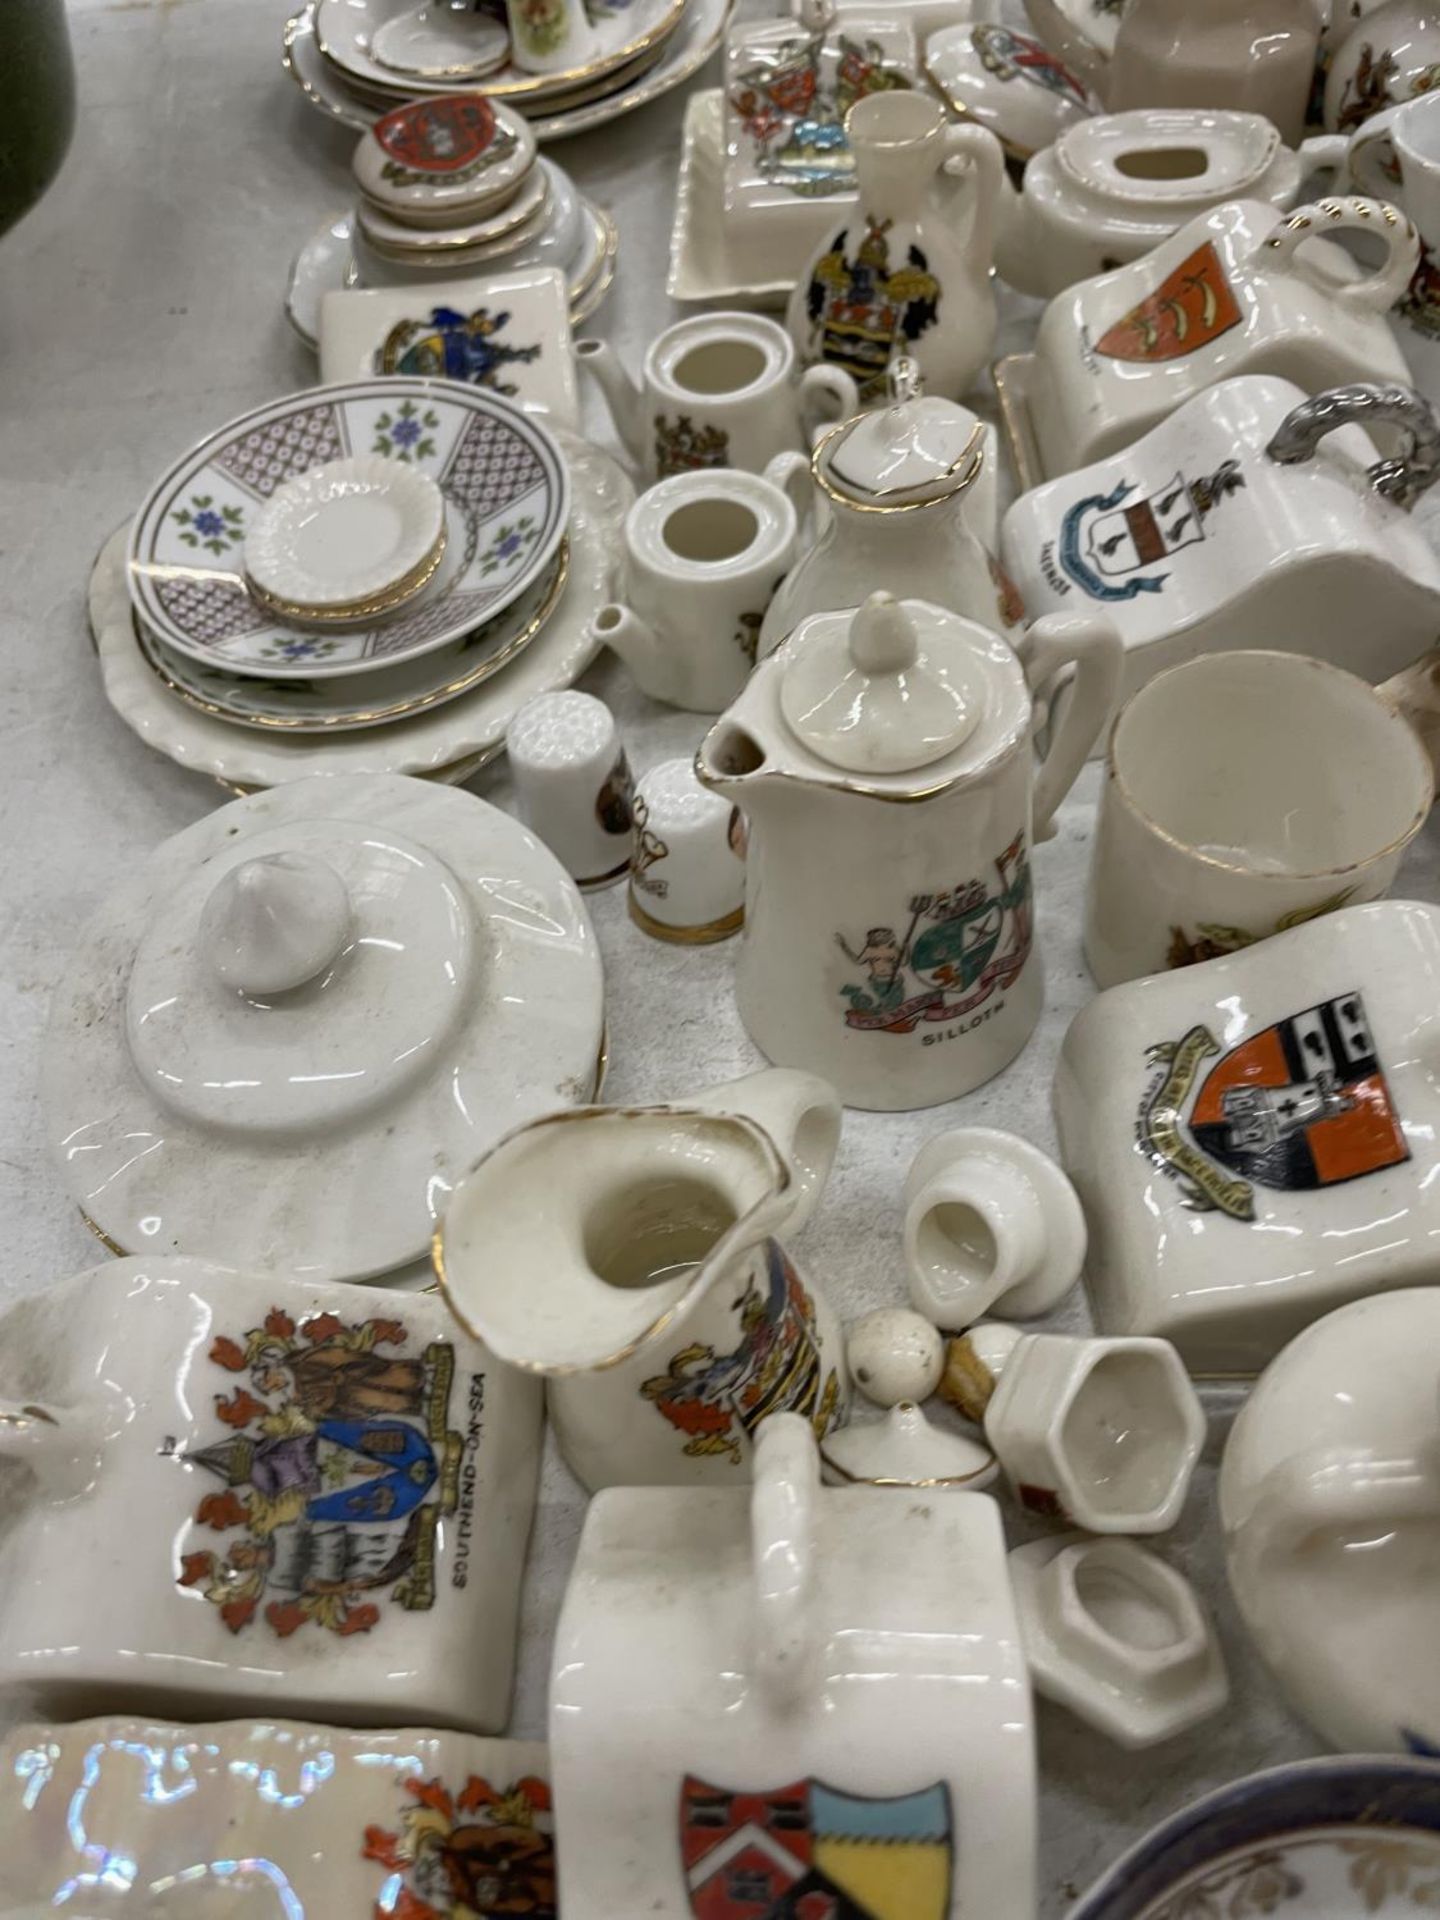 A LARGE QUANTITY OF CRESTED WARE TO INCLUDE MINIATURE CHEESE DISHES, PLATES, VASES, CUPS, JUGS, ETC - Image 4 of 11